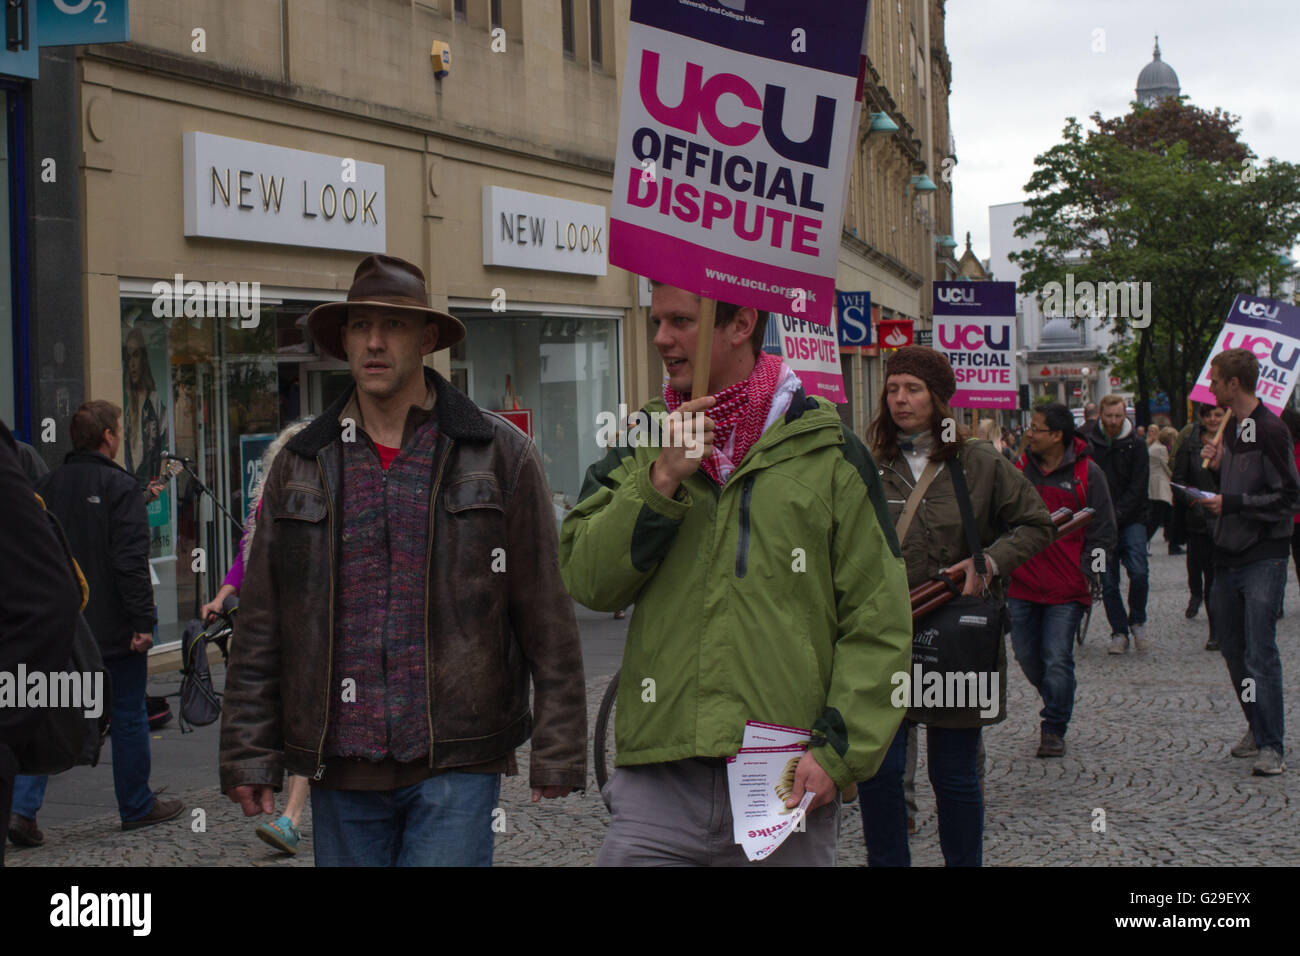 University and College Union (UCU) in Sheffield took strike action due to a decrease in their real terms pay over the last few years. Stock Photo